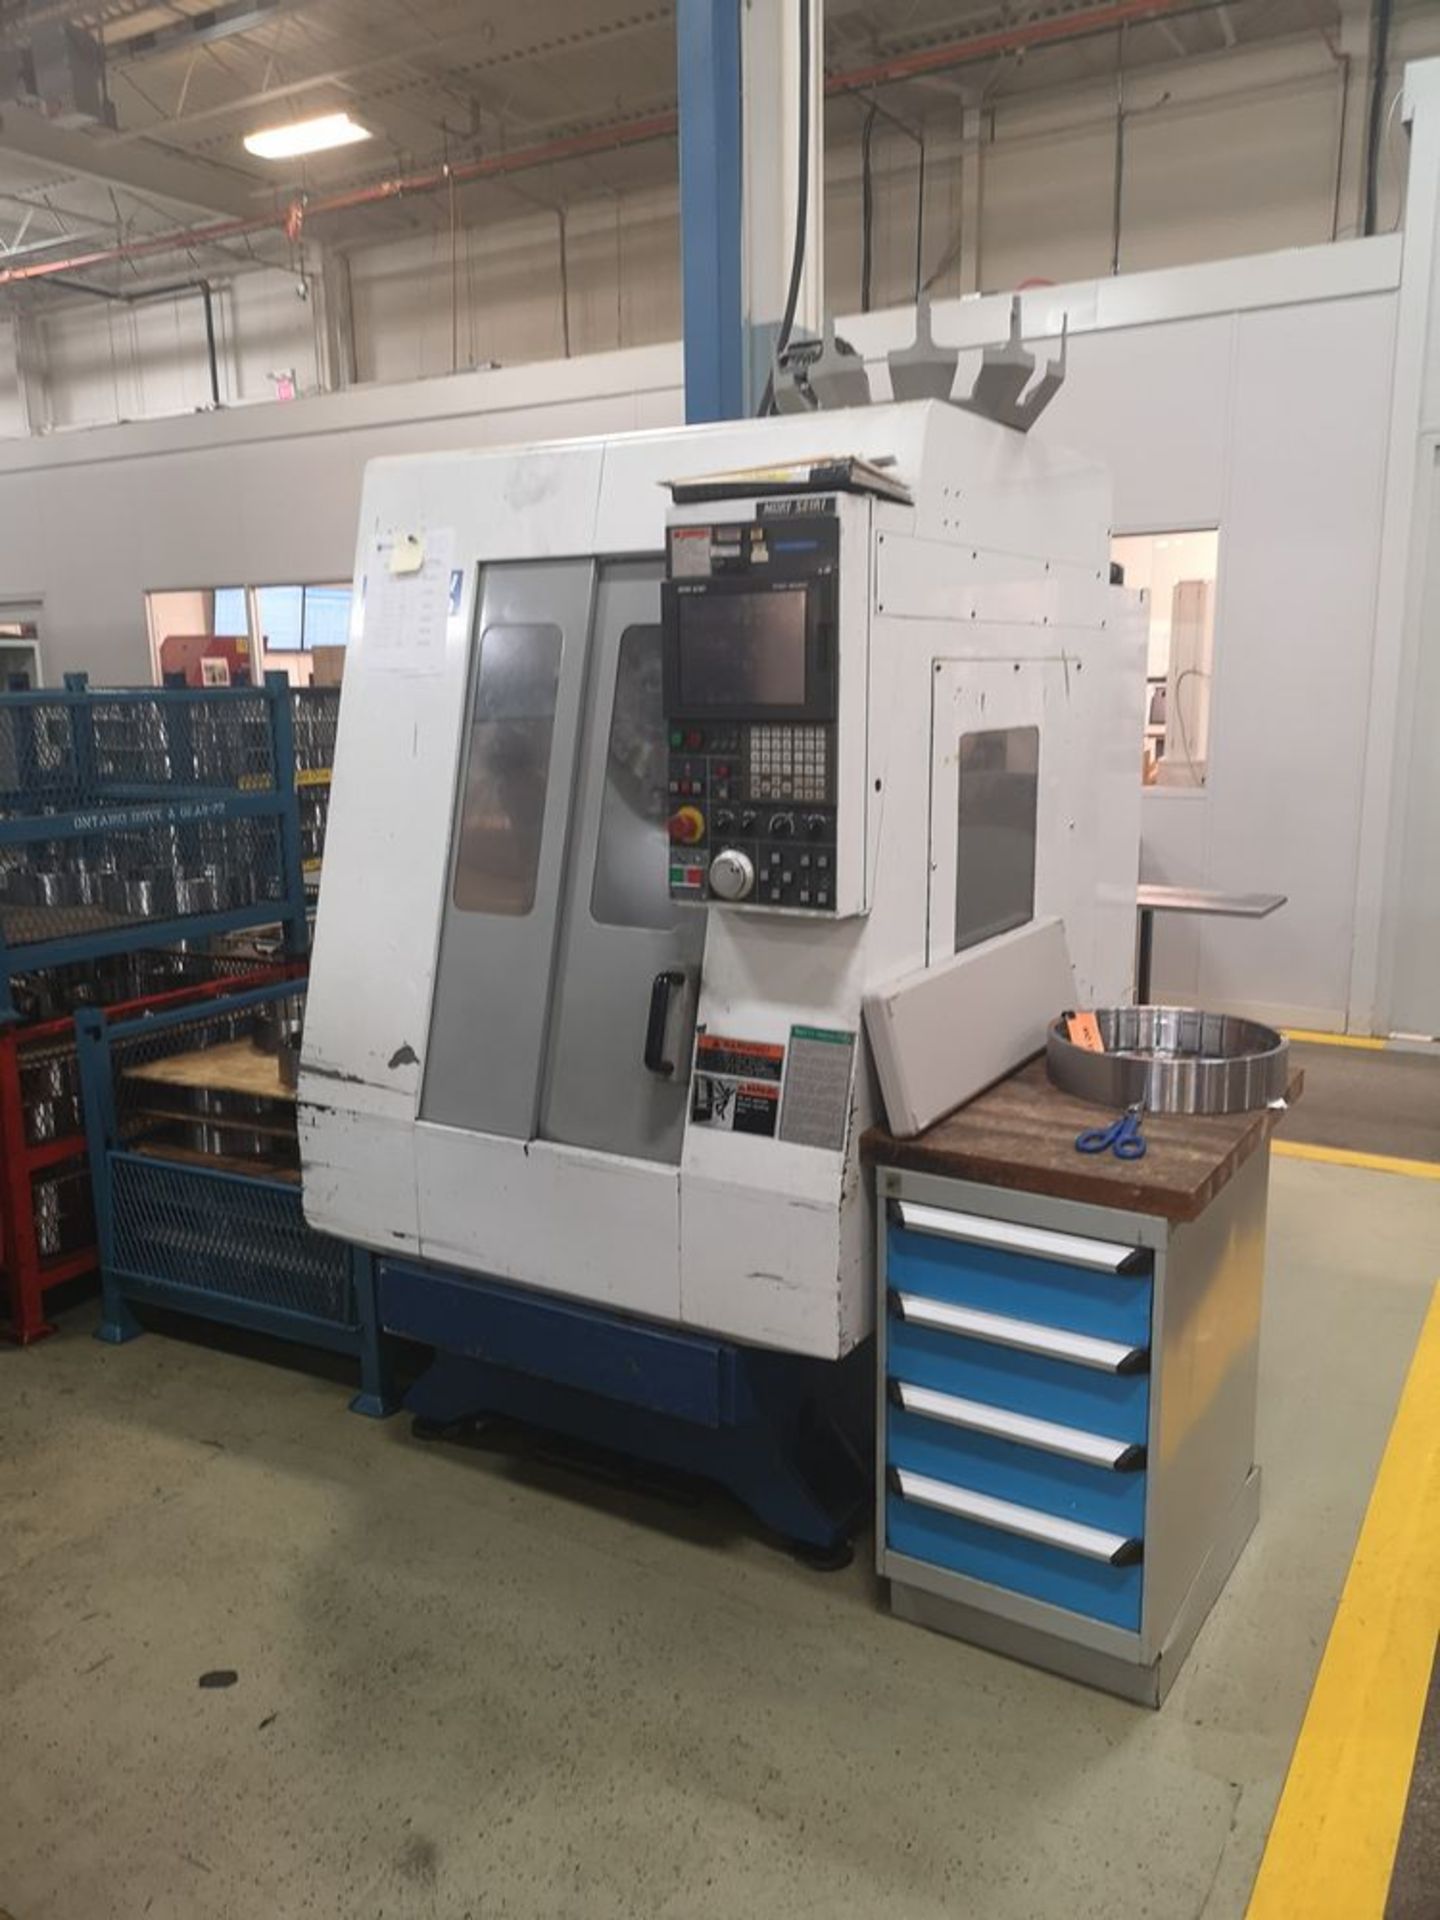 MORI-SEIKI TV-30 CNC Drilling & Tapping Center, s/n 41, 30 Taper Spindle, 8,000 RPM, 10-ATC,